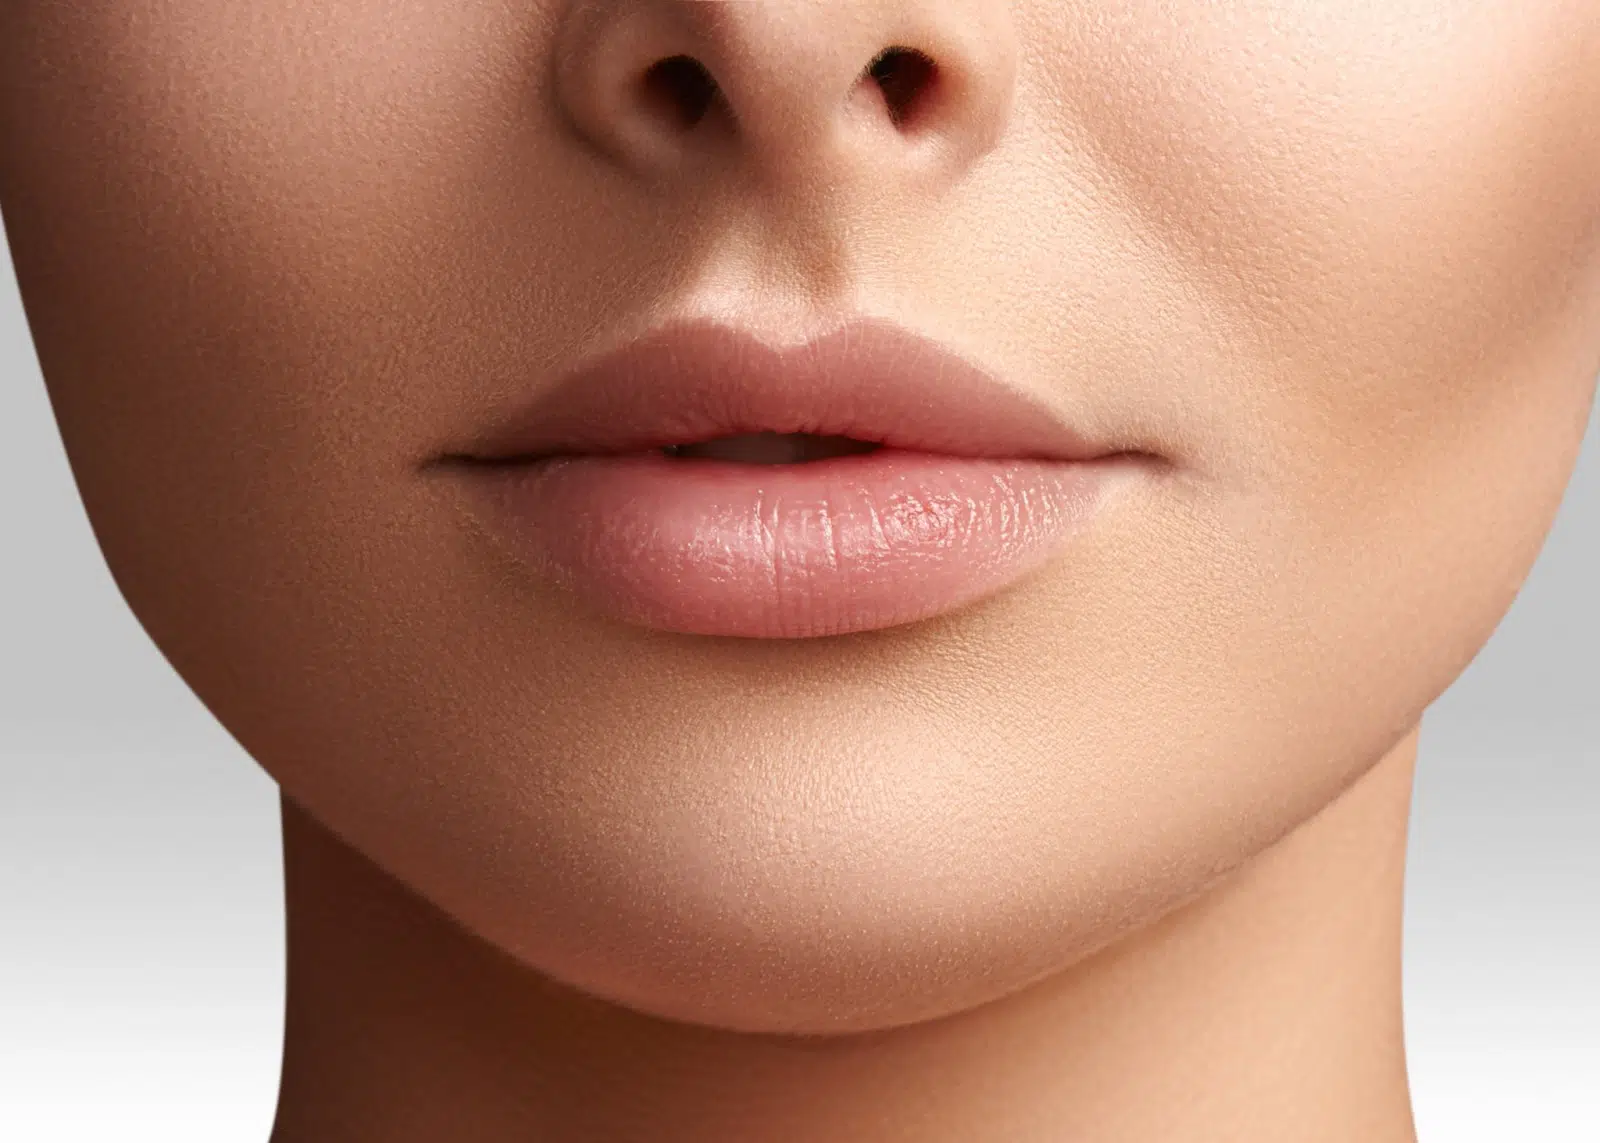 All you need to know about vertical lip line treatment in NYC